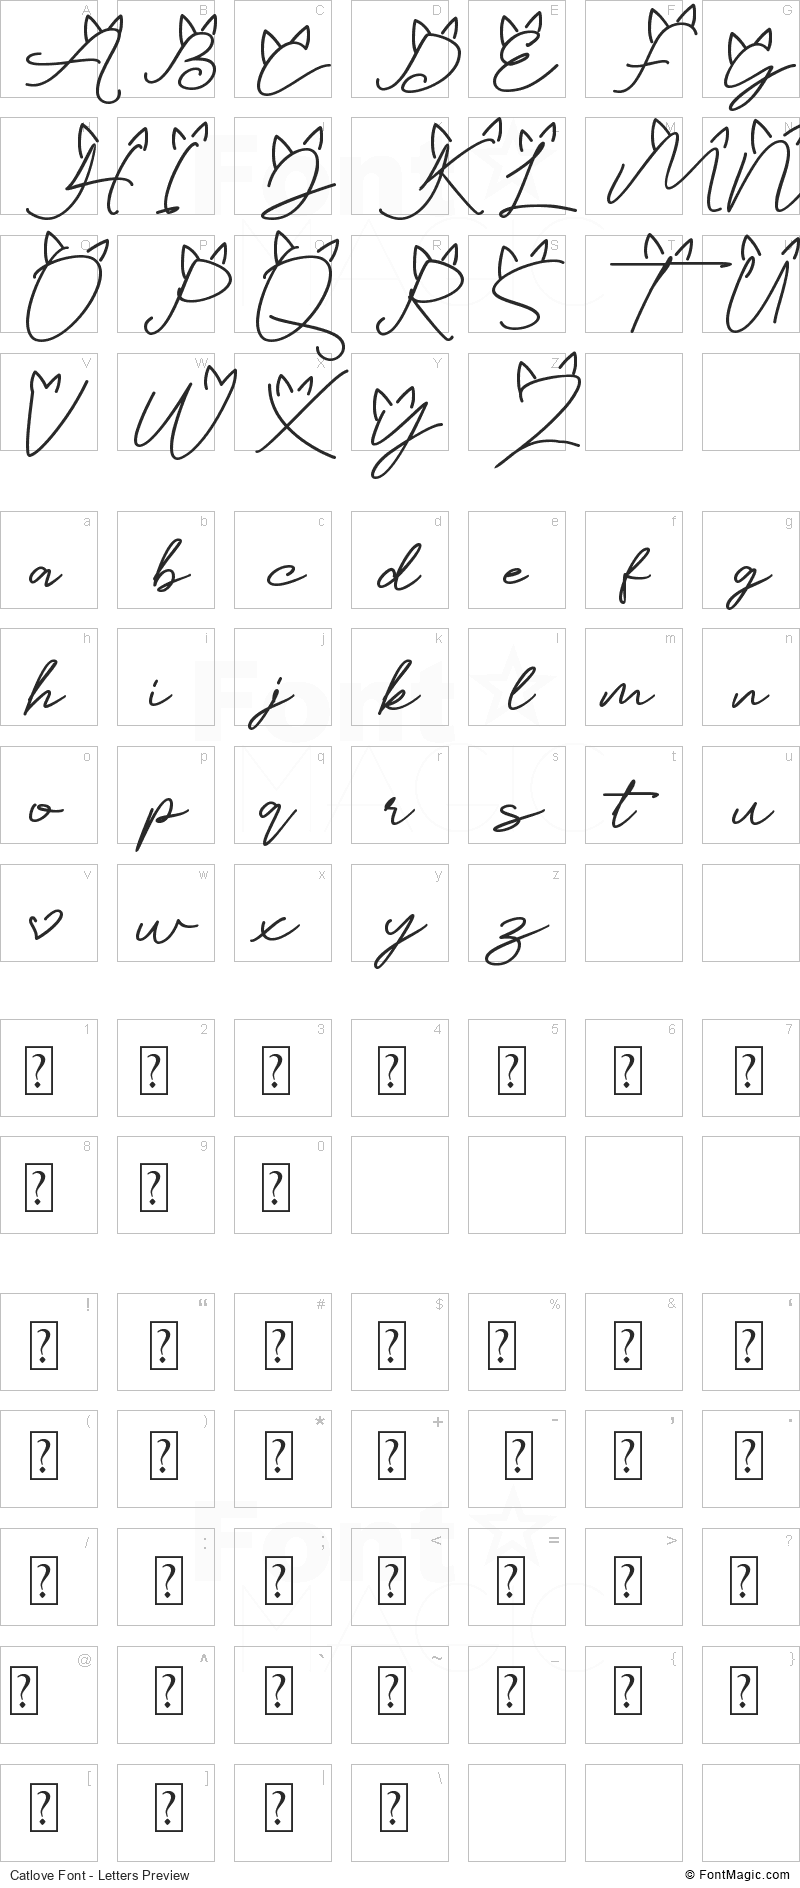 Catlove Font - All Latters Preview Chart